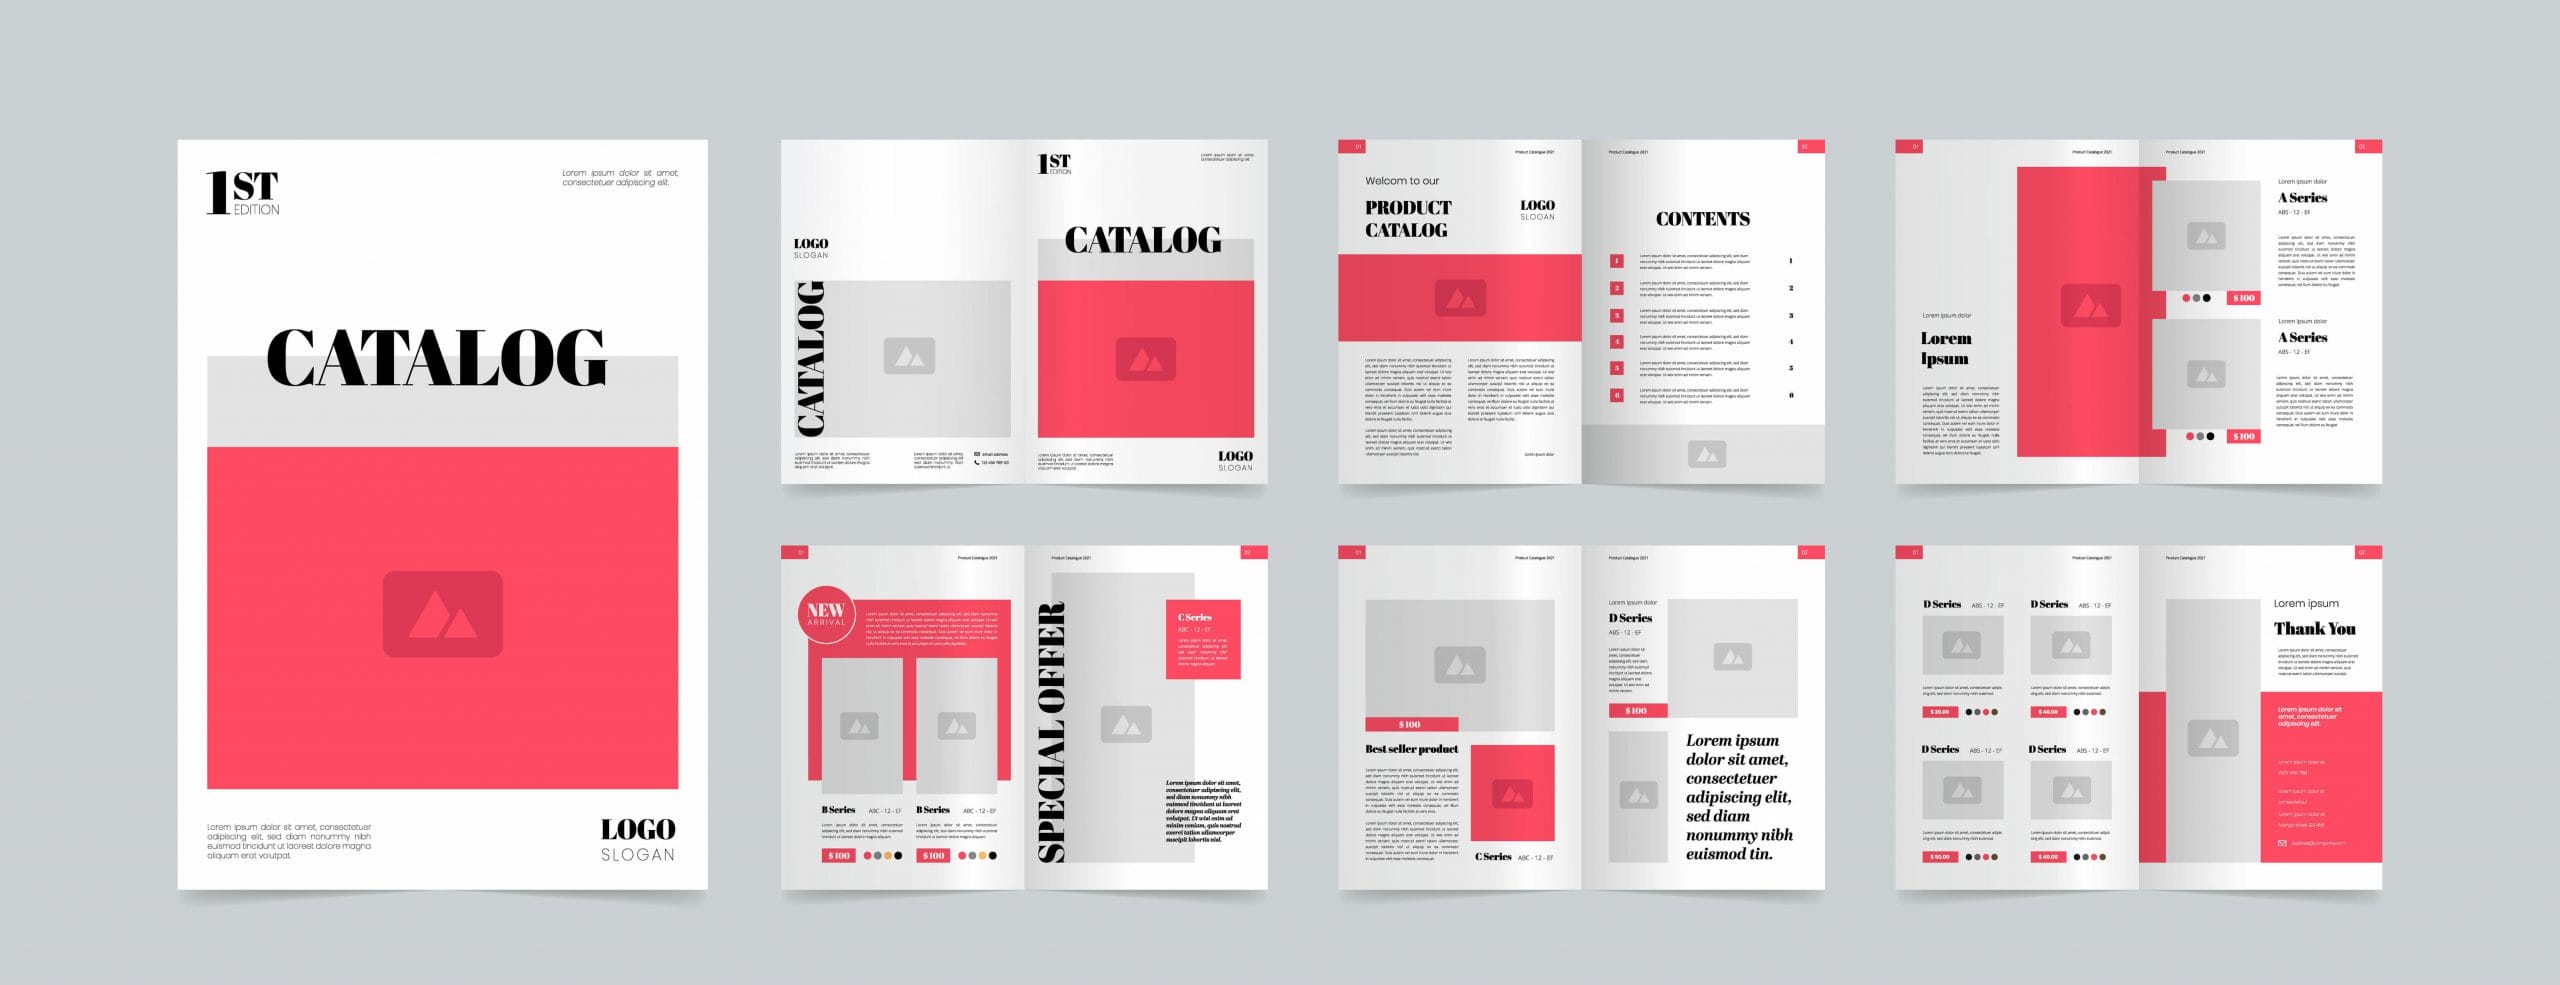 Catalog Design: The Dos And Don'ts